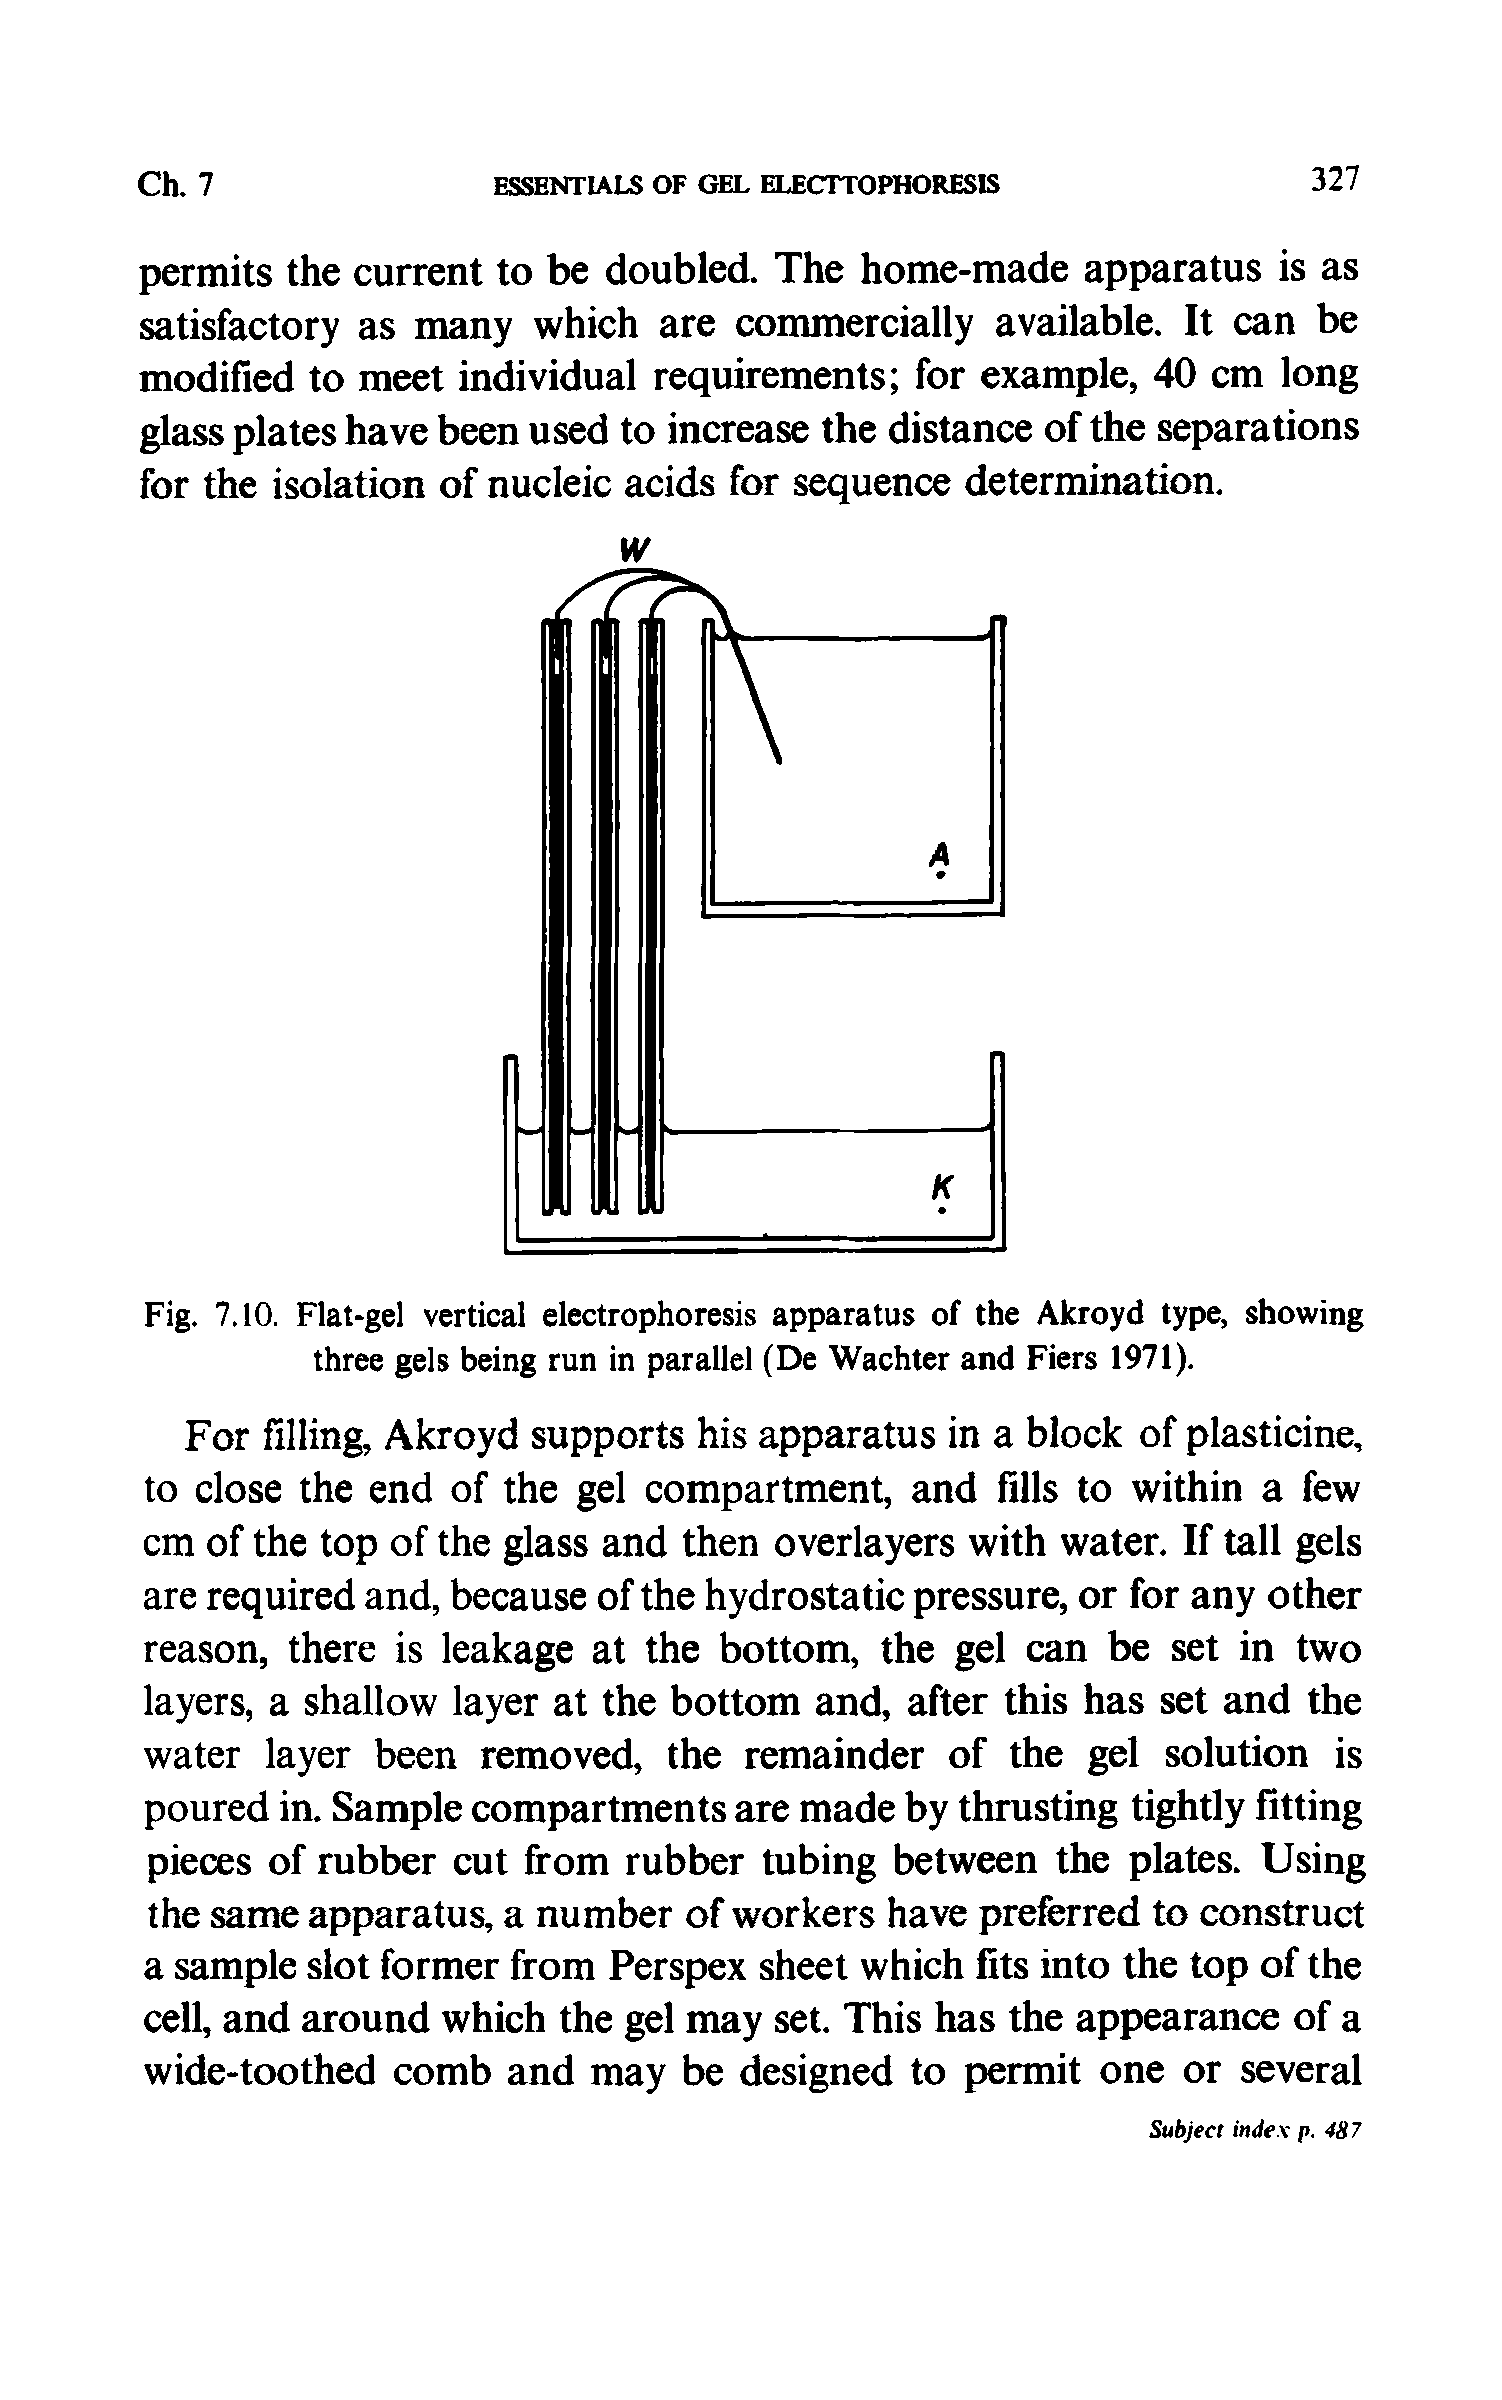 Fig. 7.10. Flat-gel vertical electrophoresis apparatus of the Akroyd type, showing three gels being run in parallel (De Wachter and Fiers 1971).